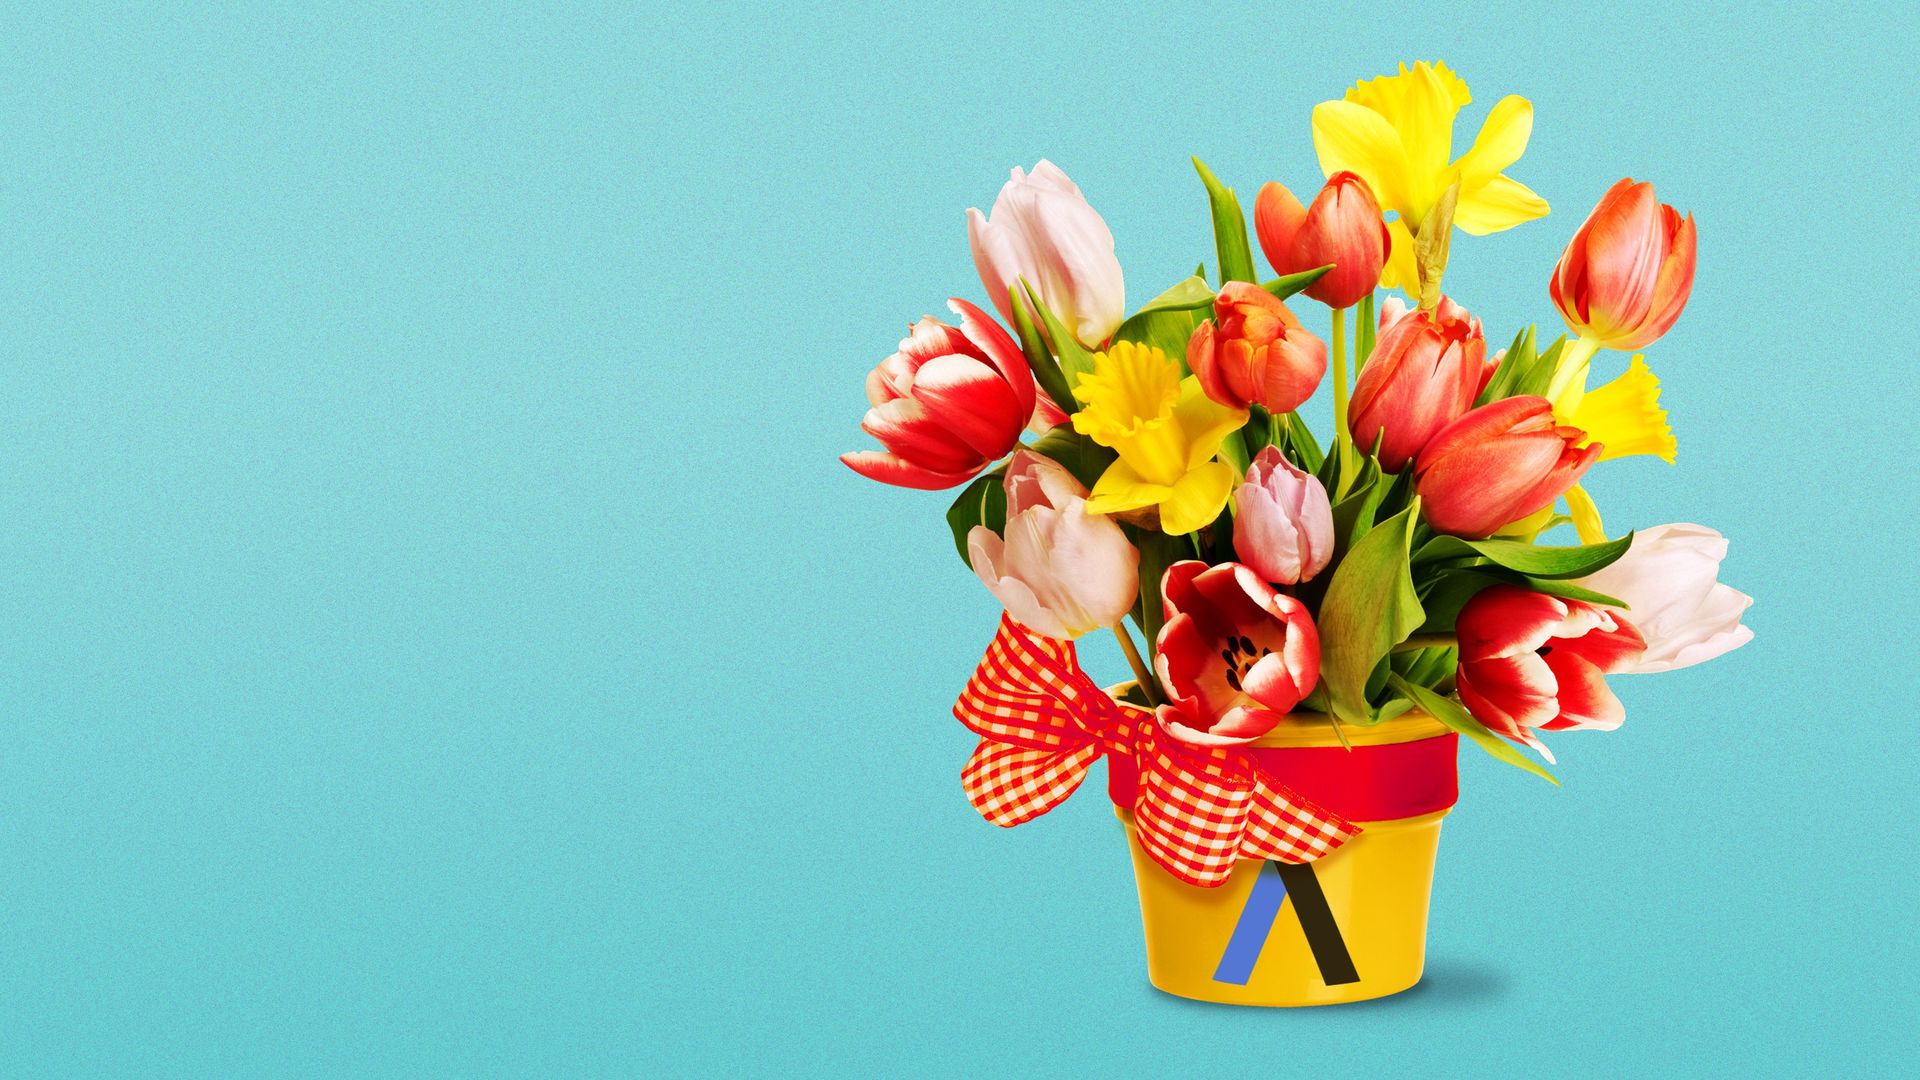 Illustration of a bouquet of tulips with the Axios A on the vase.